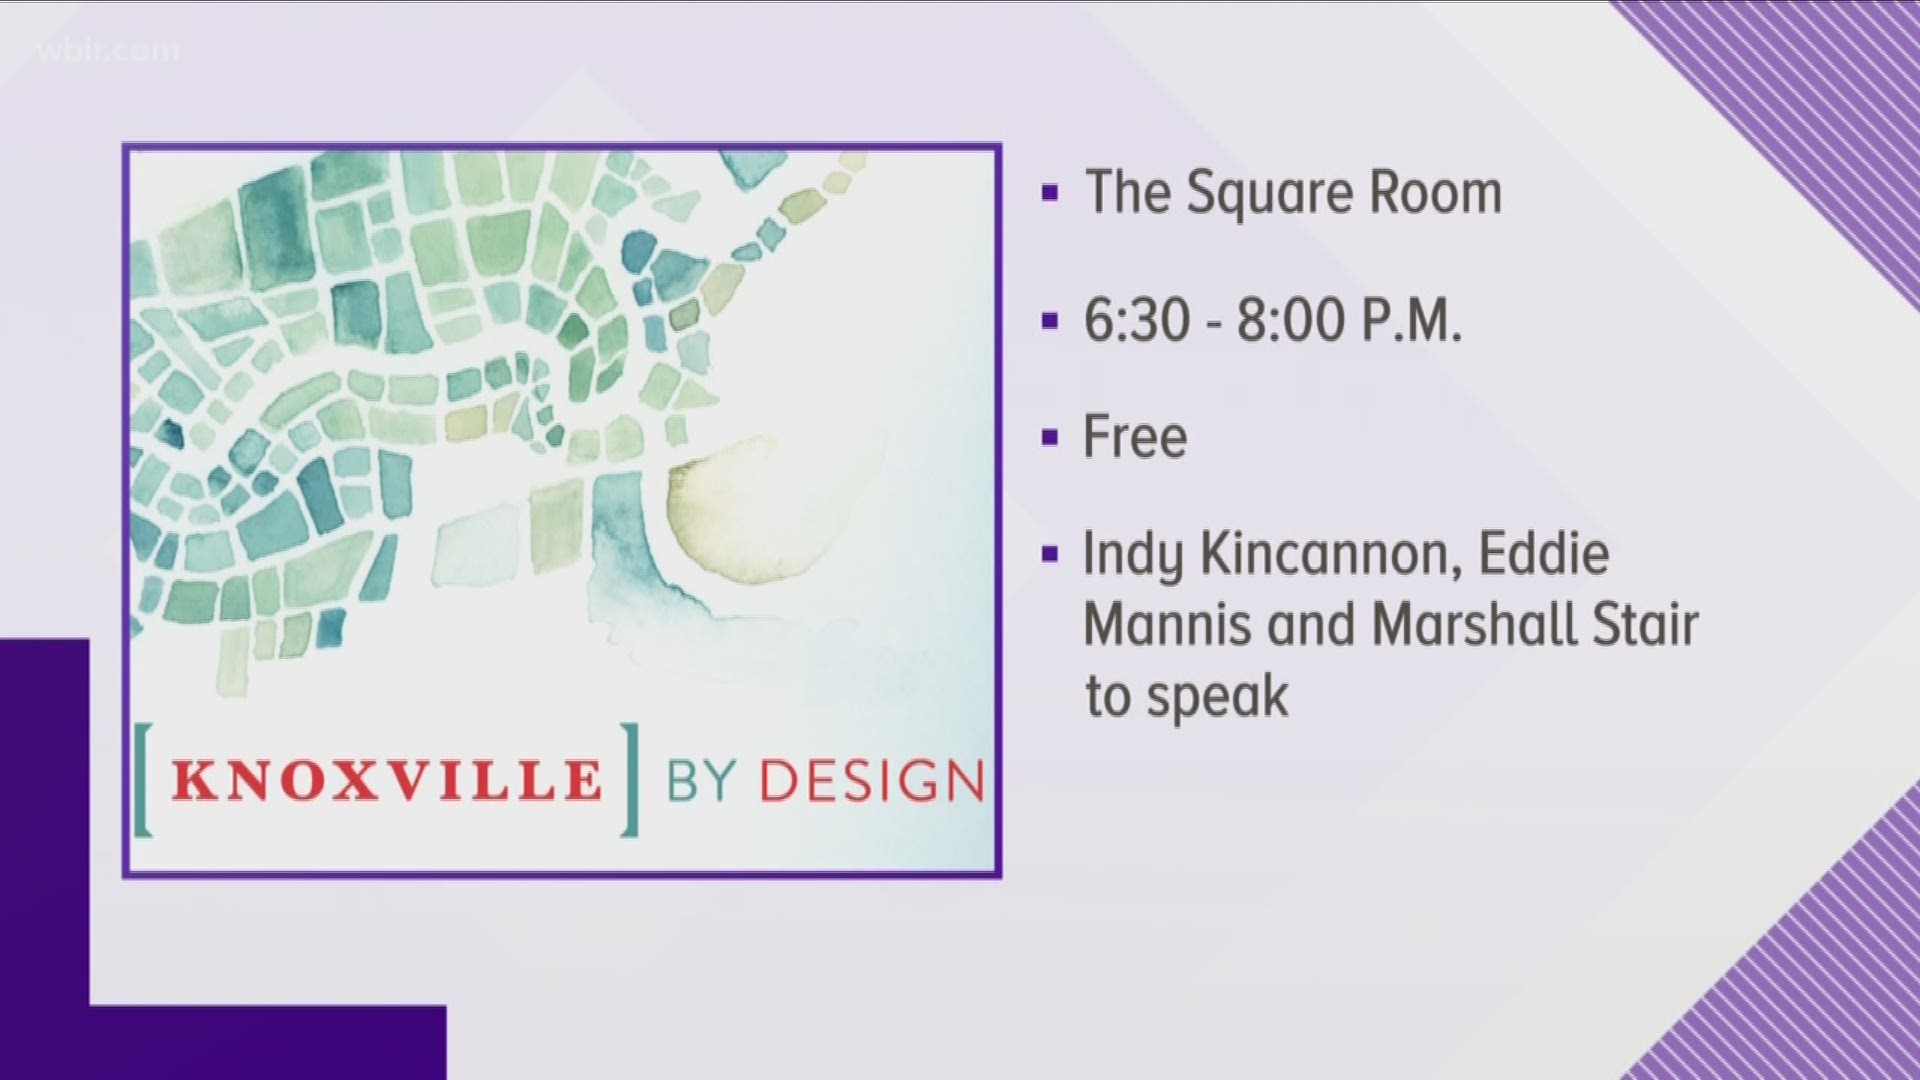 Mayoral candidates Indya Kincannon, Eddie Mannis and Marshall Stair will share how their visions and policies could impact Knoxville.